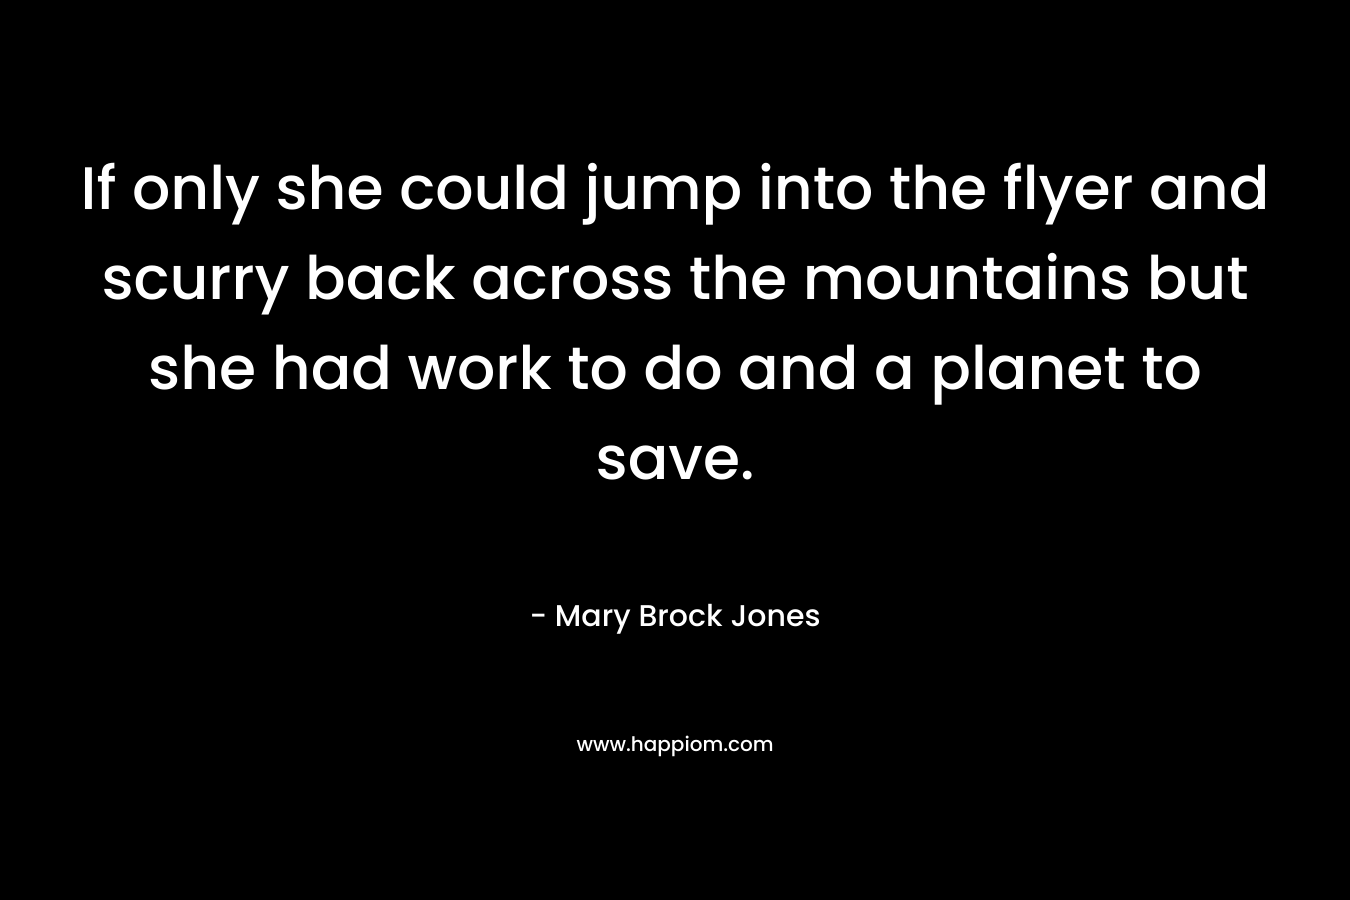 If only she could jump into the flyer and scurry back across the mountains but she had work to do and a planet to save. – Mary Brock Jones